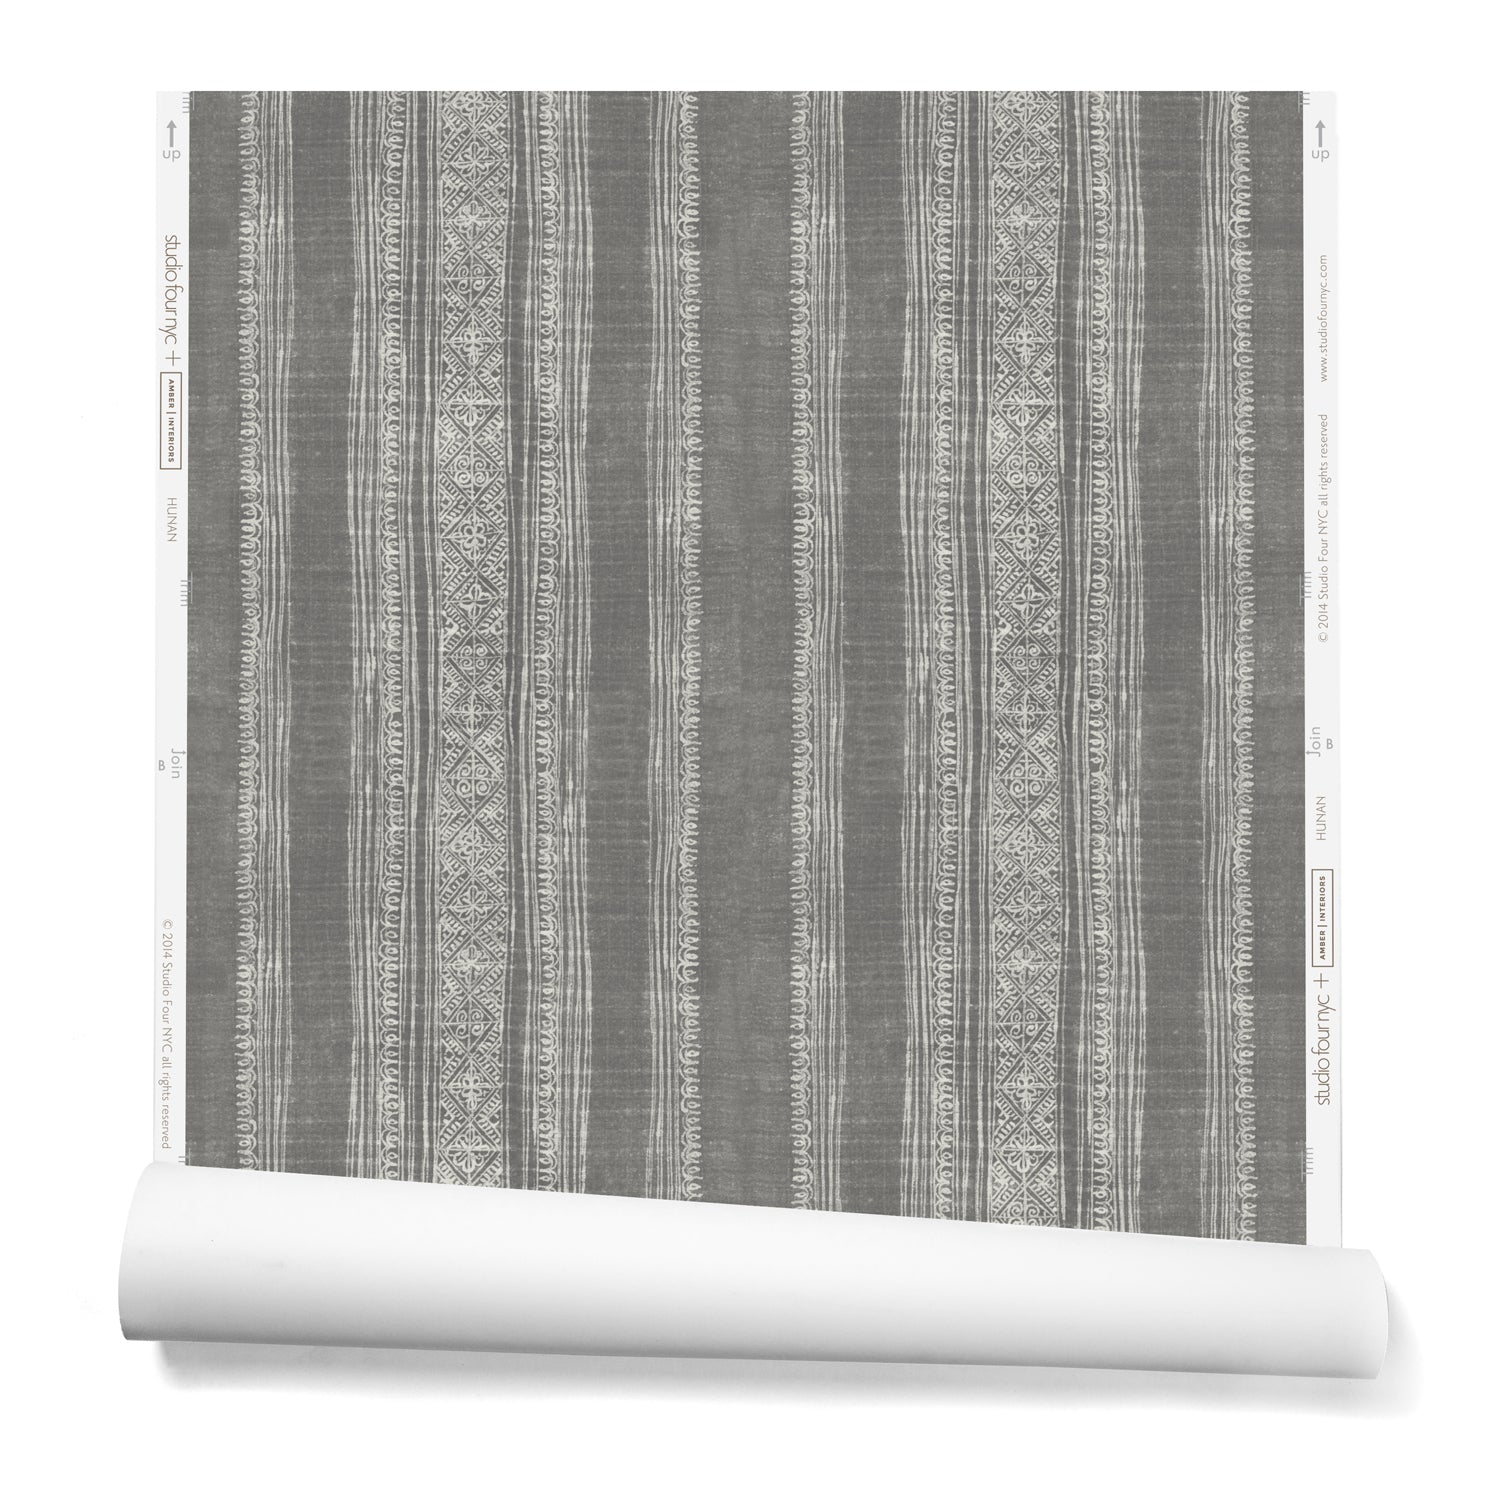 A partially unrolled roll of wallpaper in a striped pattern of intricate white lines over a washed gray background.